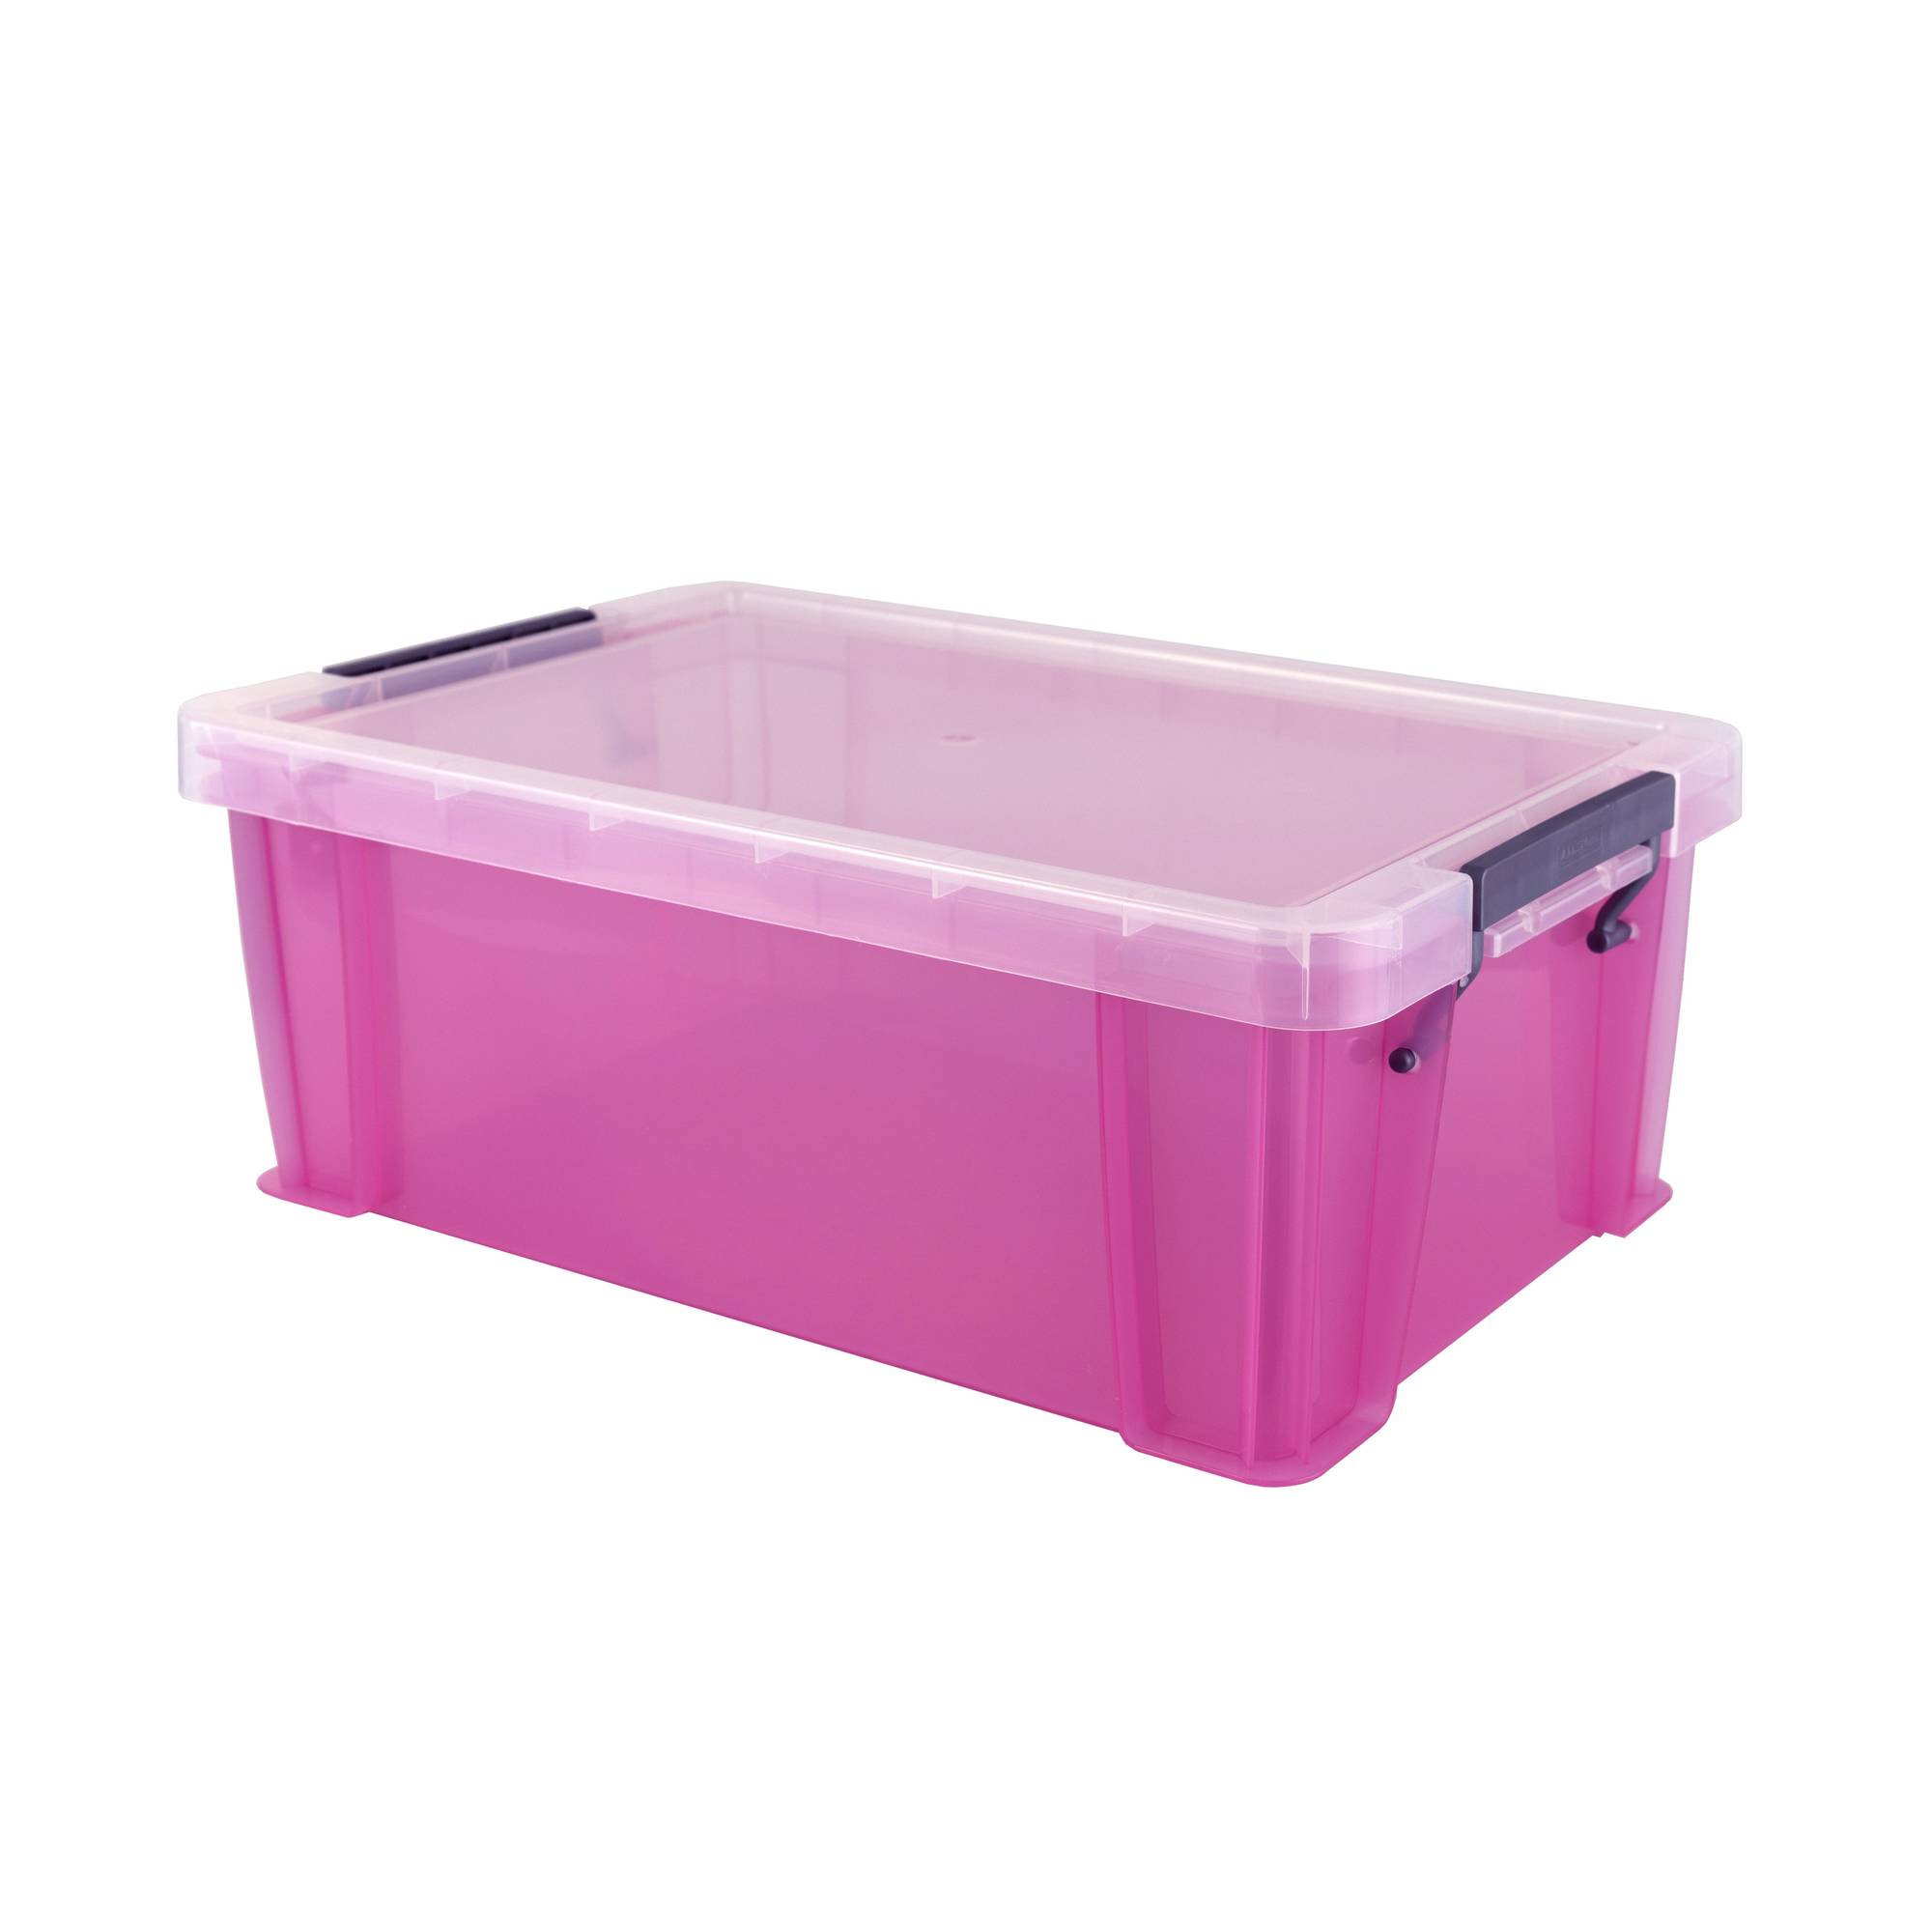 10 Foot Container Pink Ral 3014 – Waitrose Cowes Store